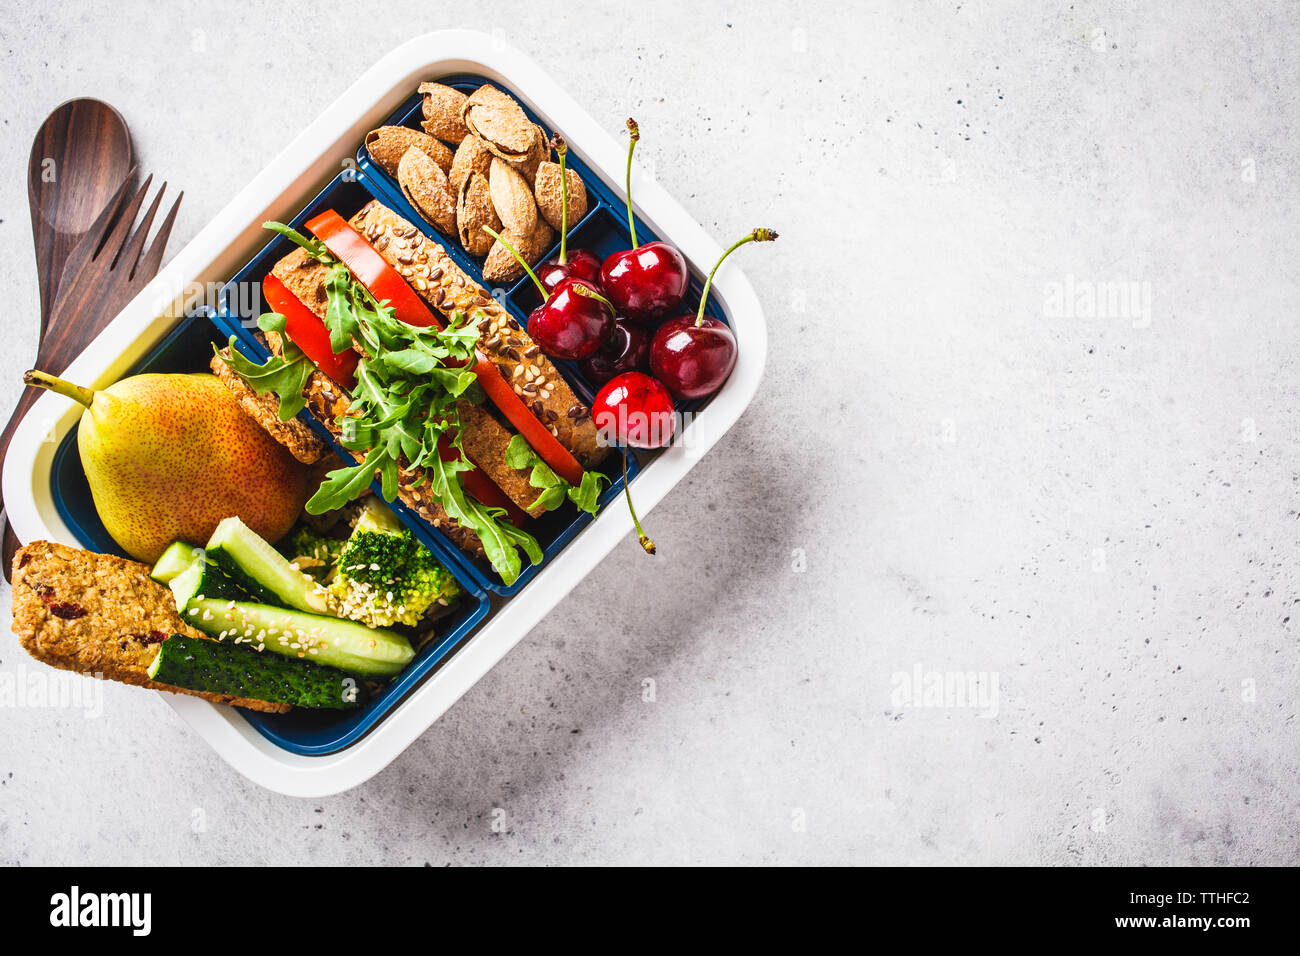 https://c8.alamy.com/comp/TTHFC2/lunch-box-with-sandwich-pear-vegetables-nuts-and-snacks-on-a-gray-background-top-view-copy-space-TTHFC2.jpg